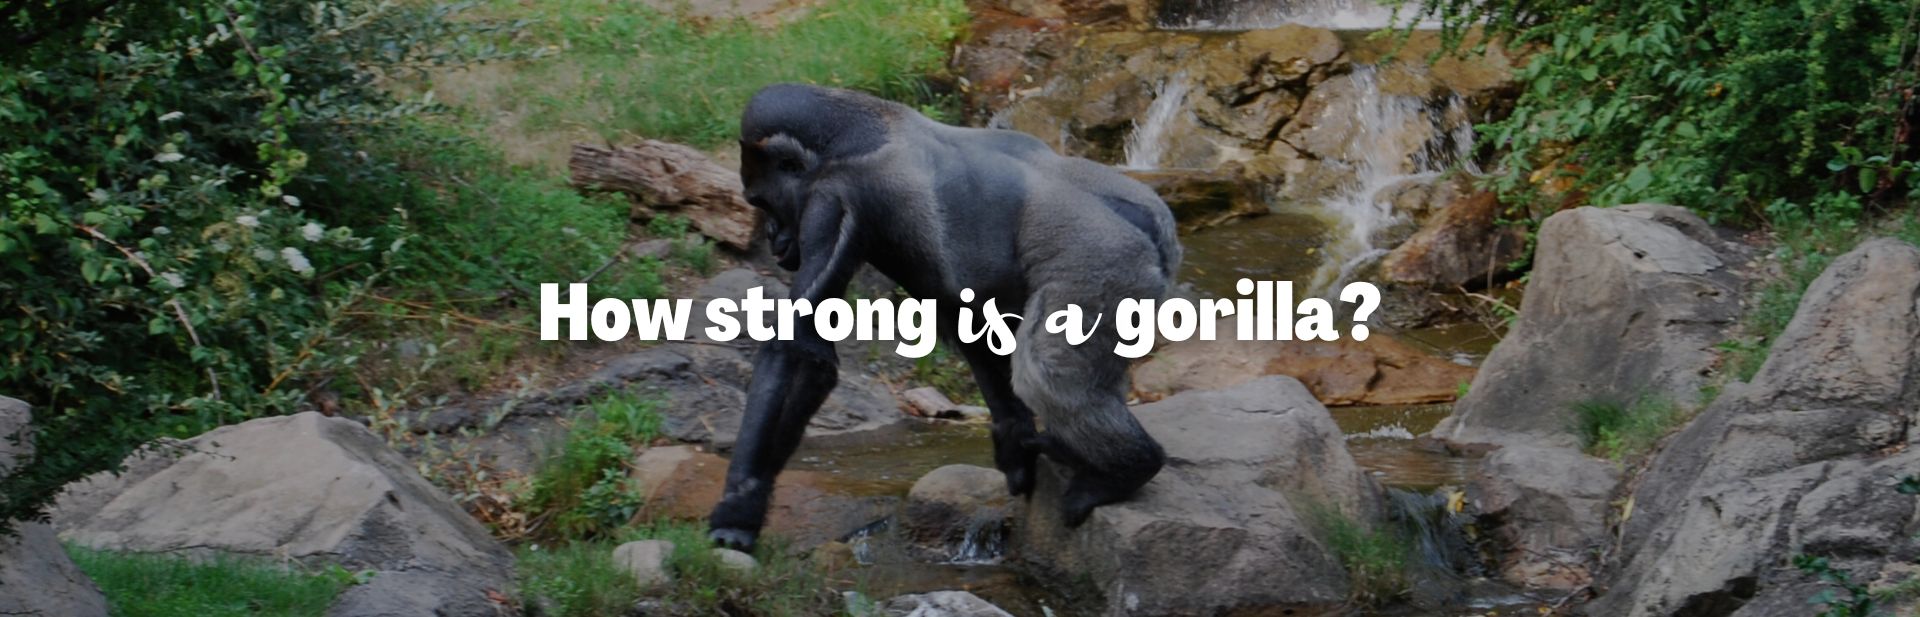 How Strong Is a Gorilla? The Largest and Strongest of the Great Apes